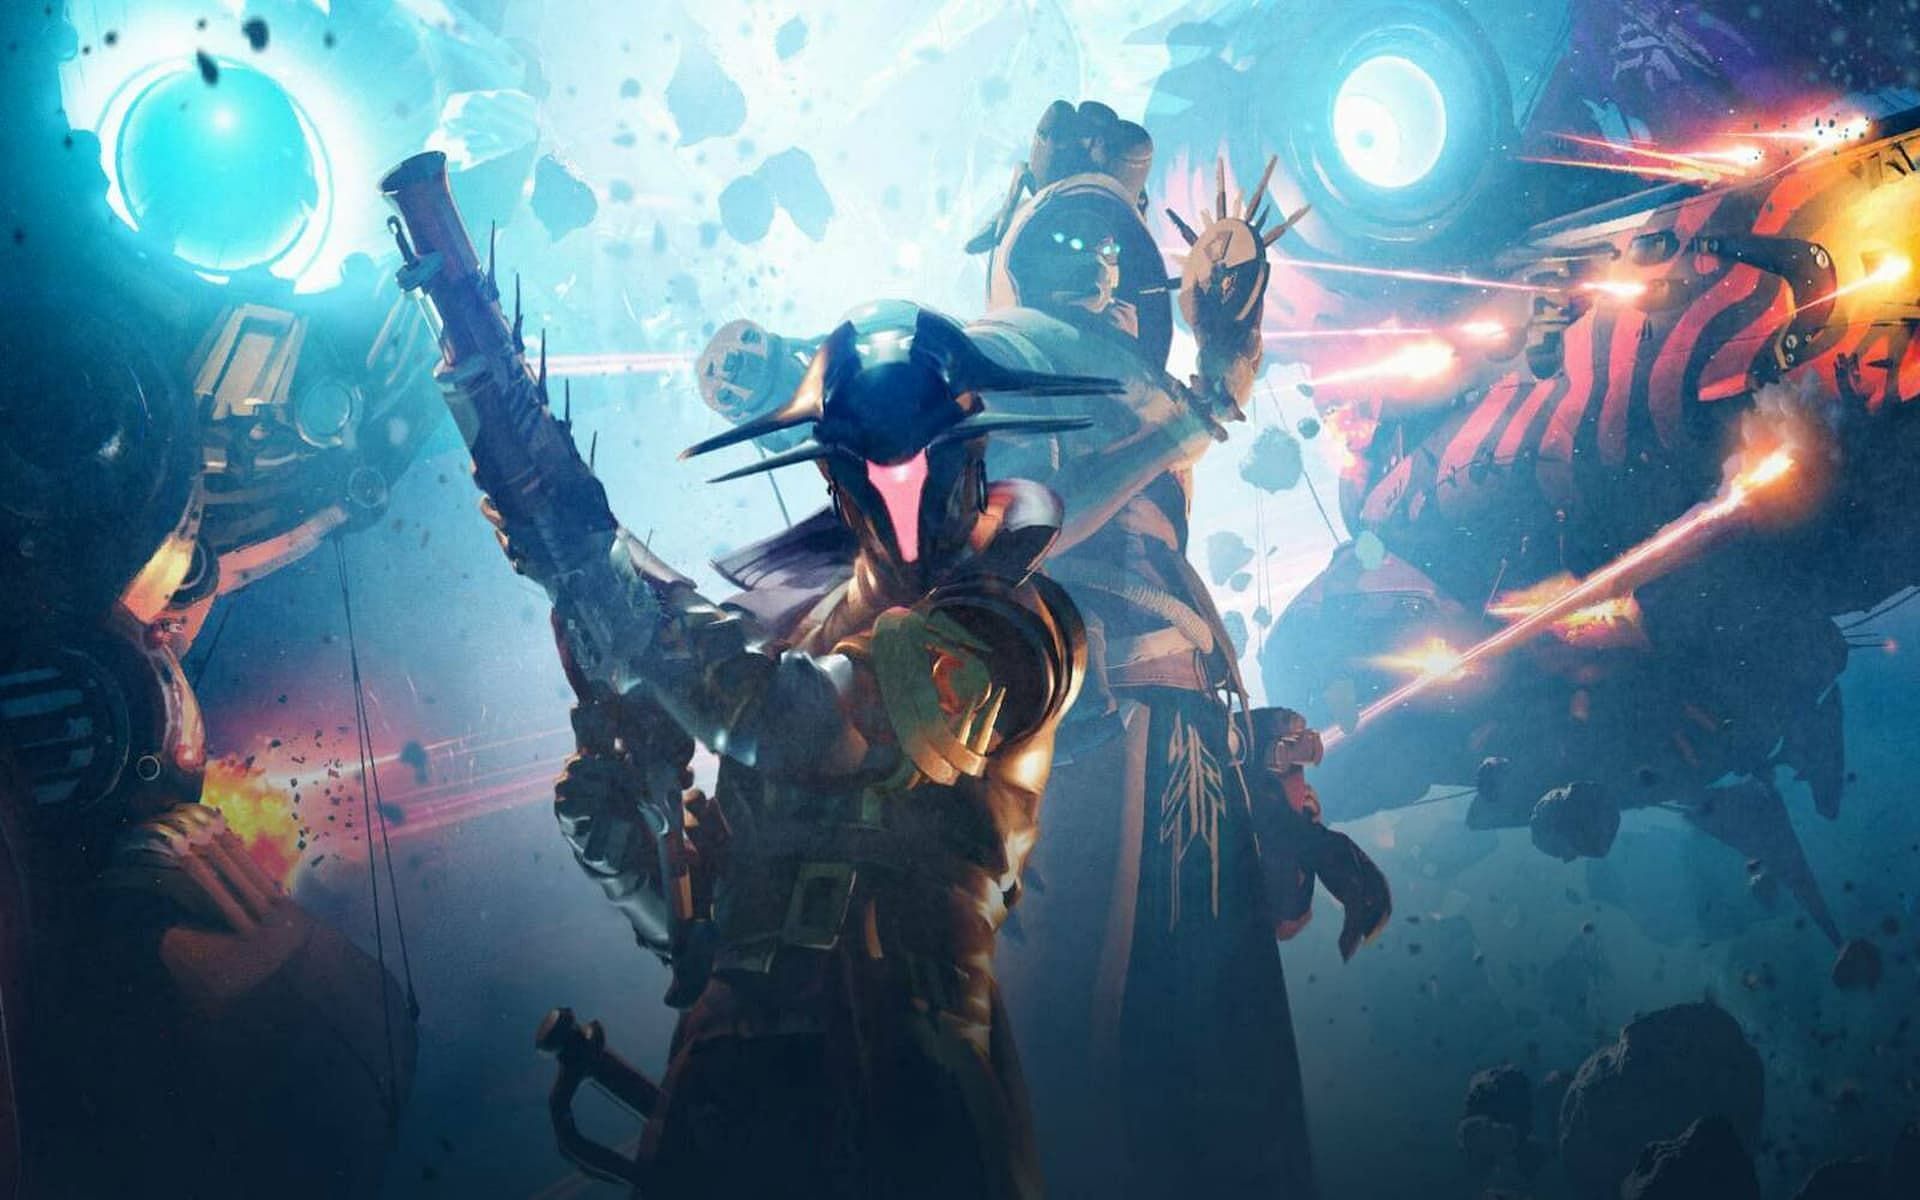 Destiny 2 Season of Plunder has introduced a pirate theme to the game (Image via Bungie)